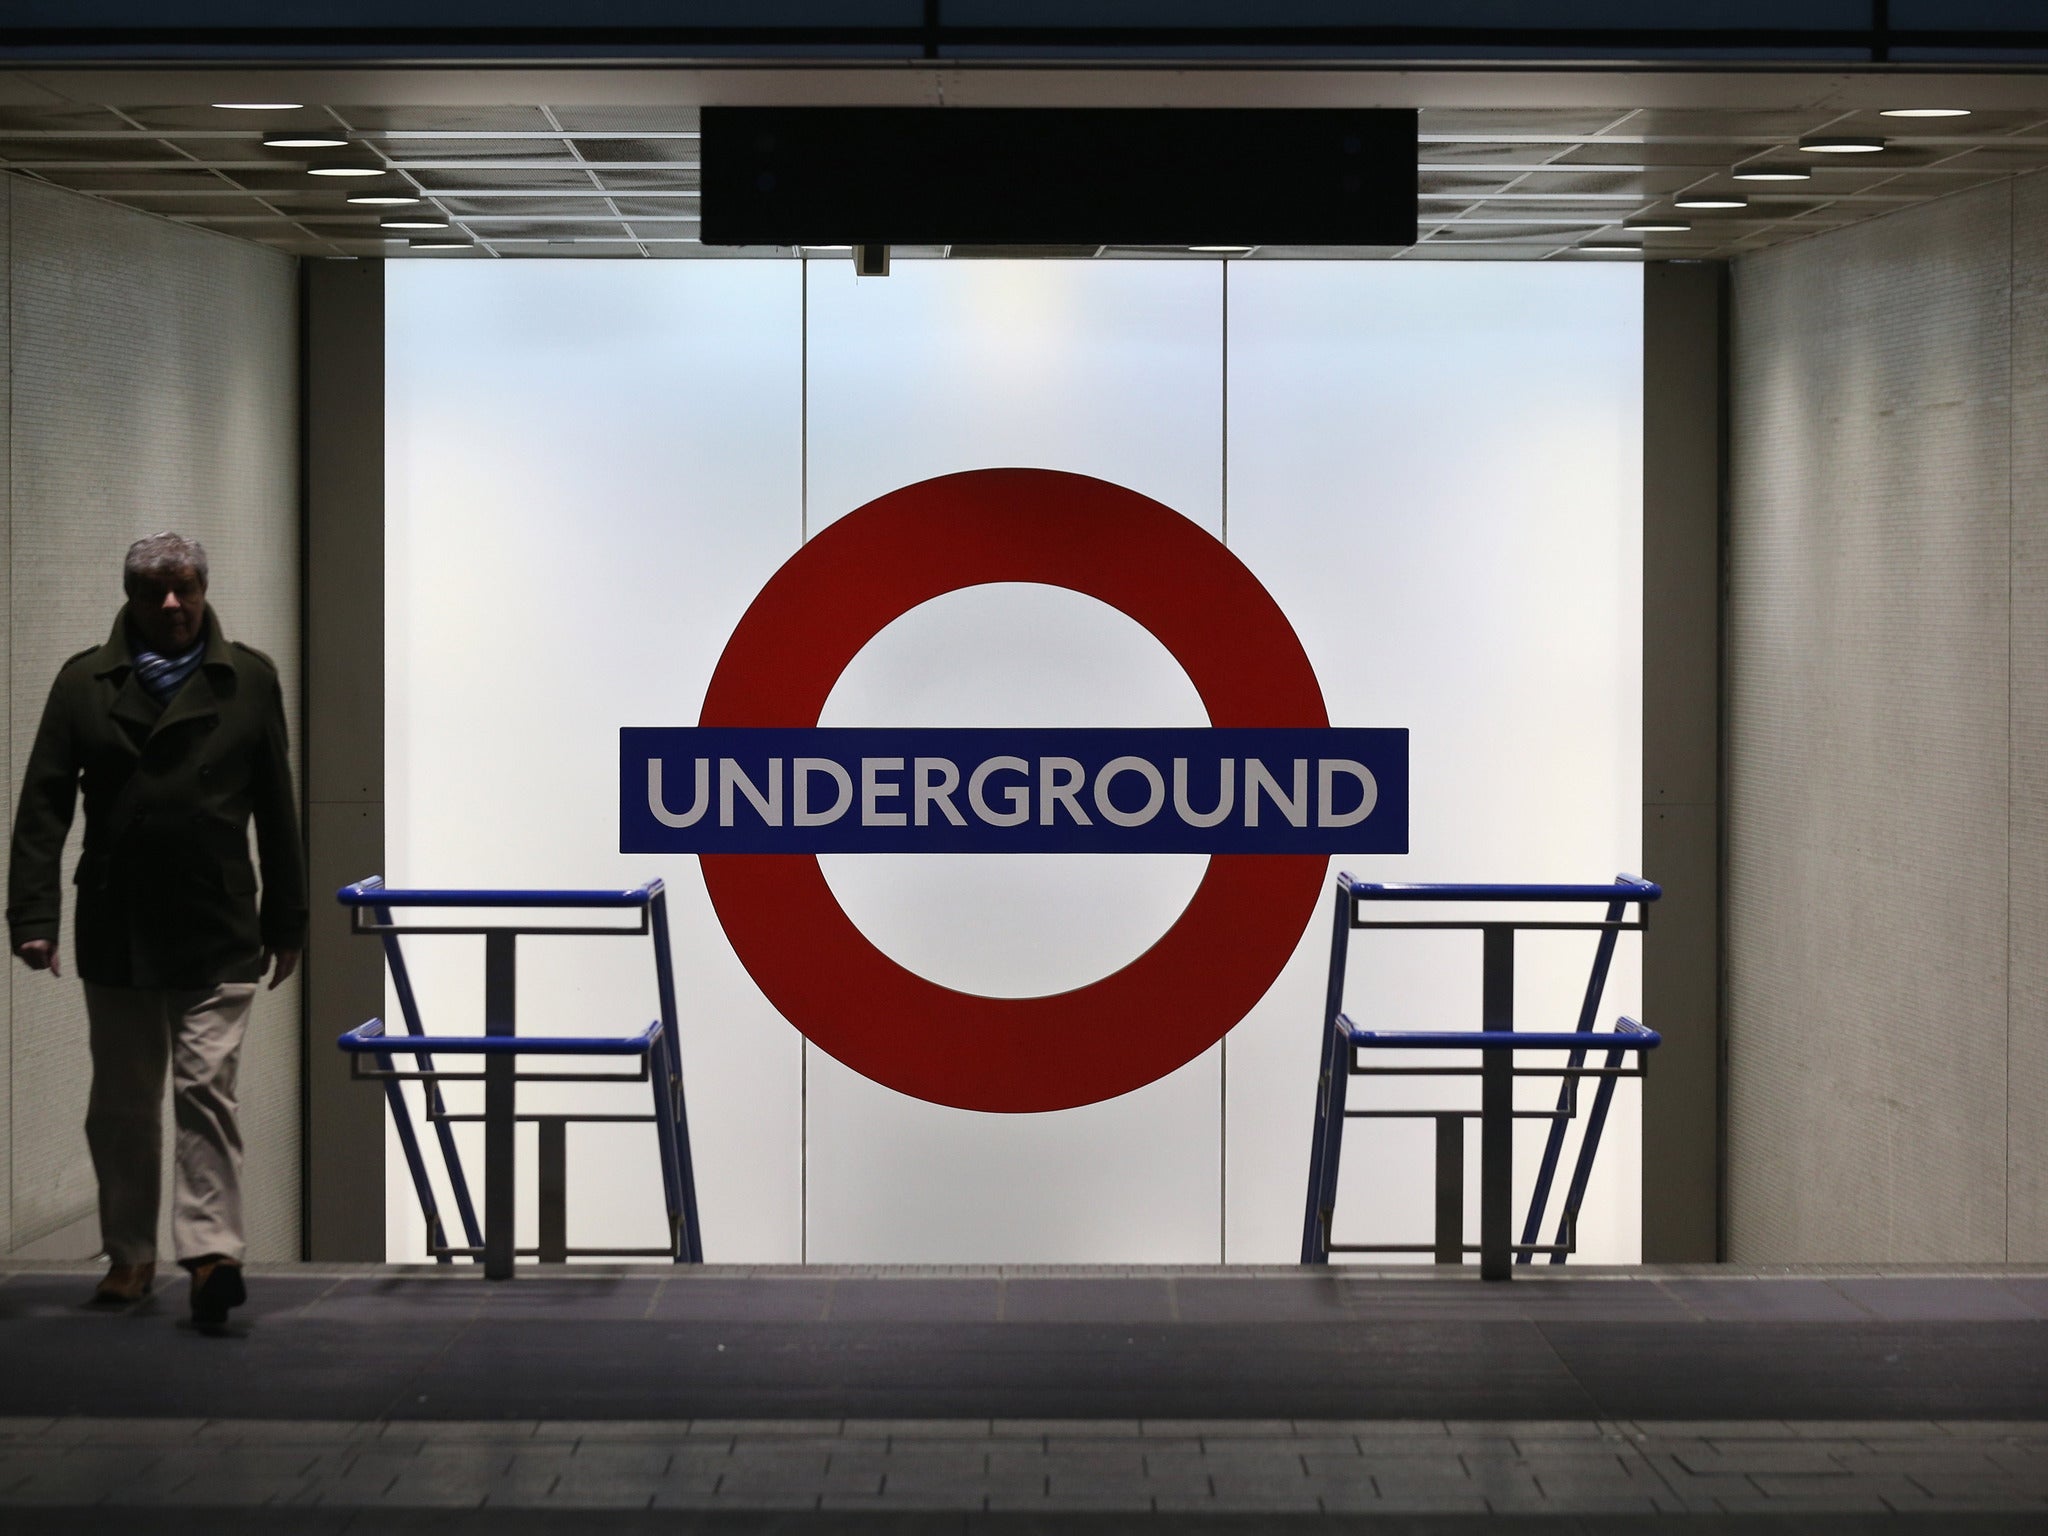 RMT has called the claims 'scaremongering' by London Underground